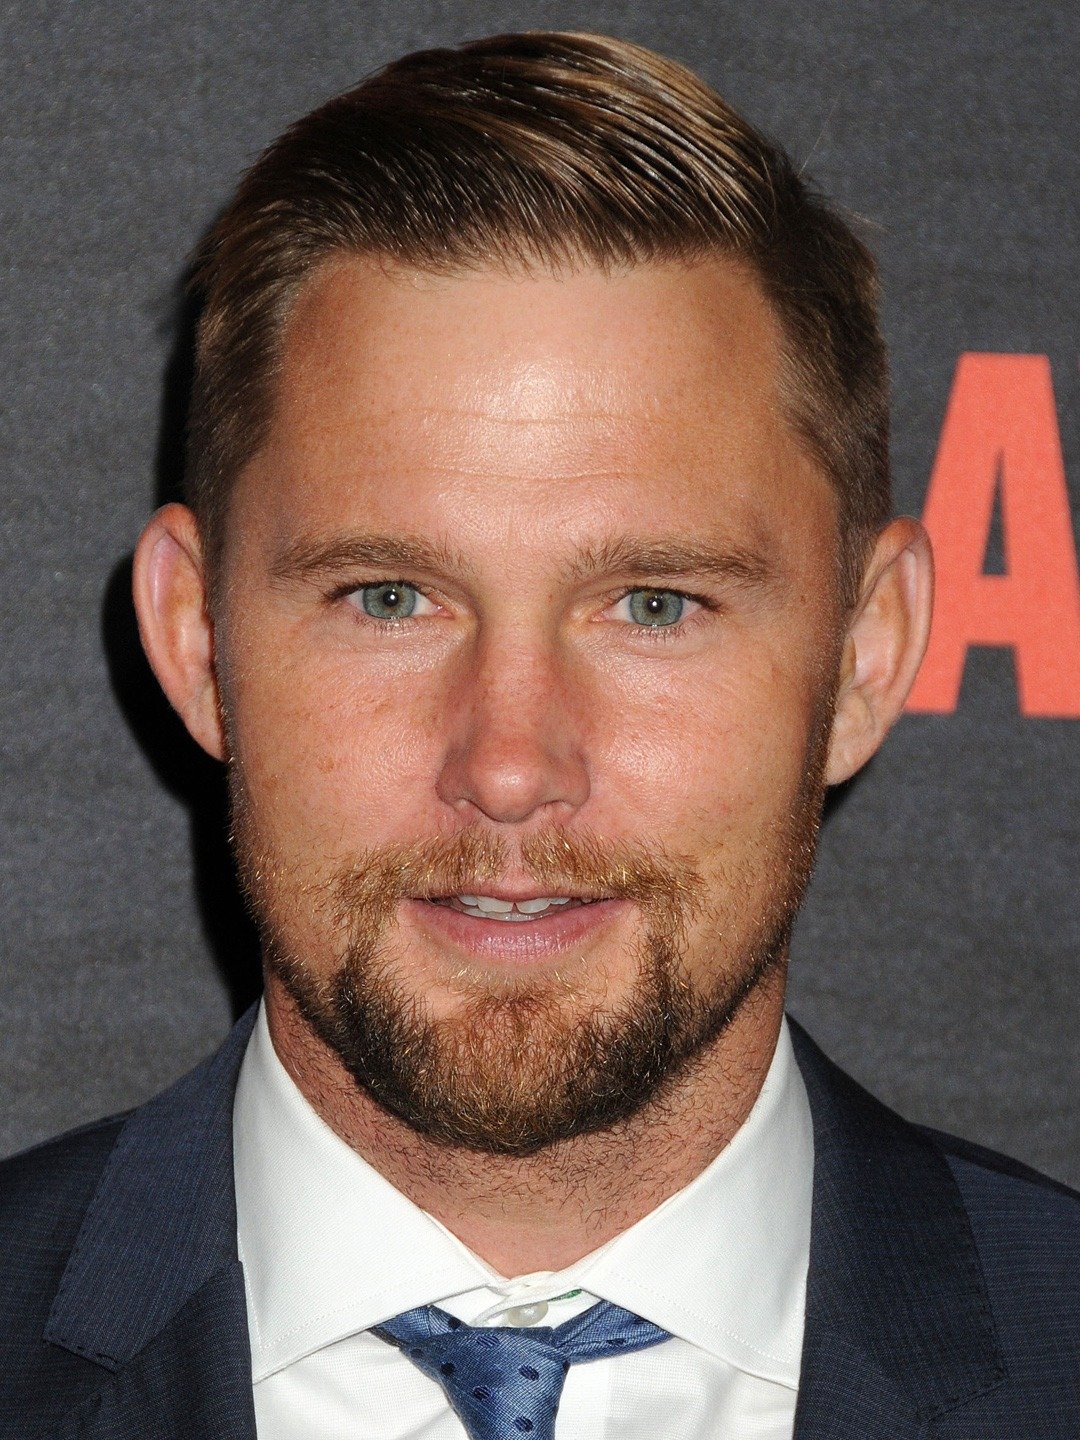 How tall is Brian Geraghty?